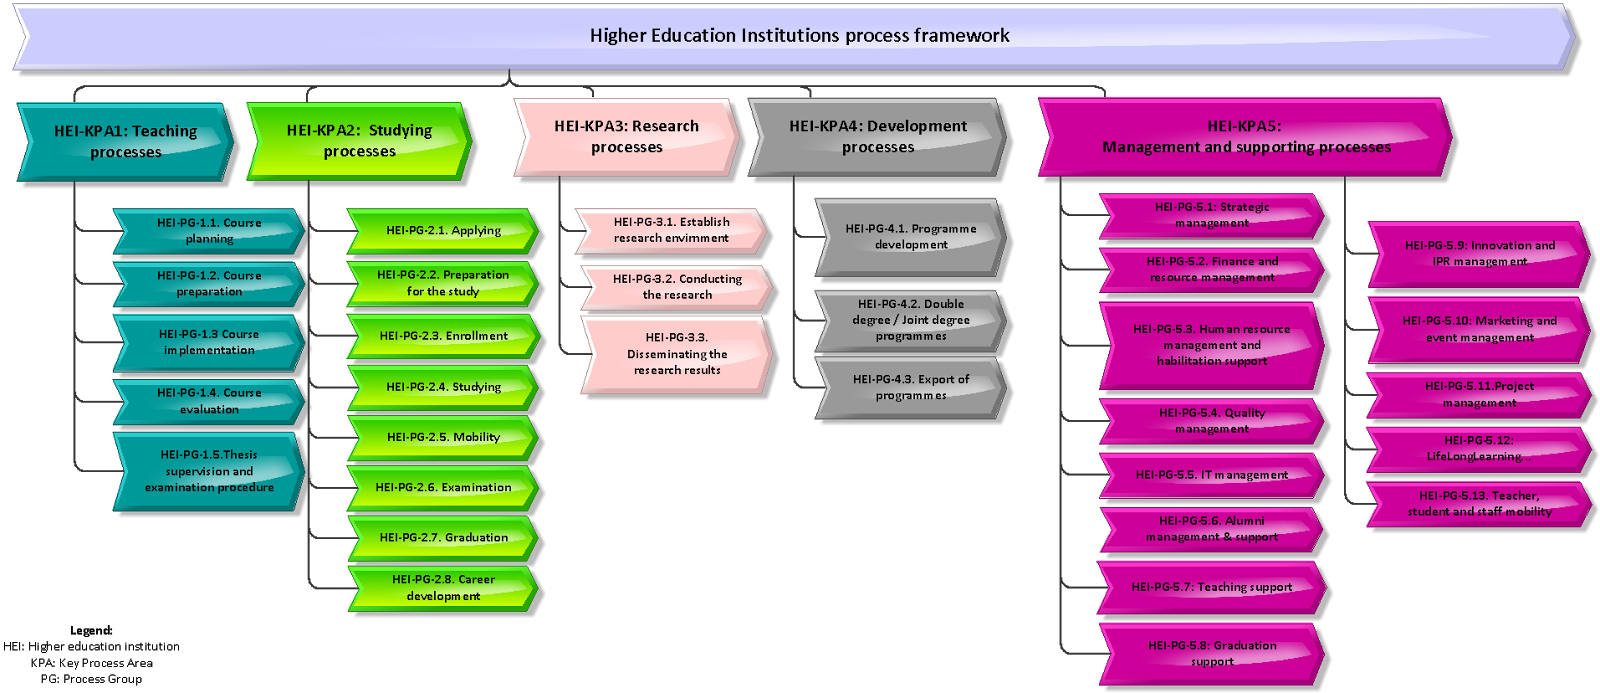 Higher Education institutions. Education process. Educational institution Management. Education-institution пример. Educational process